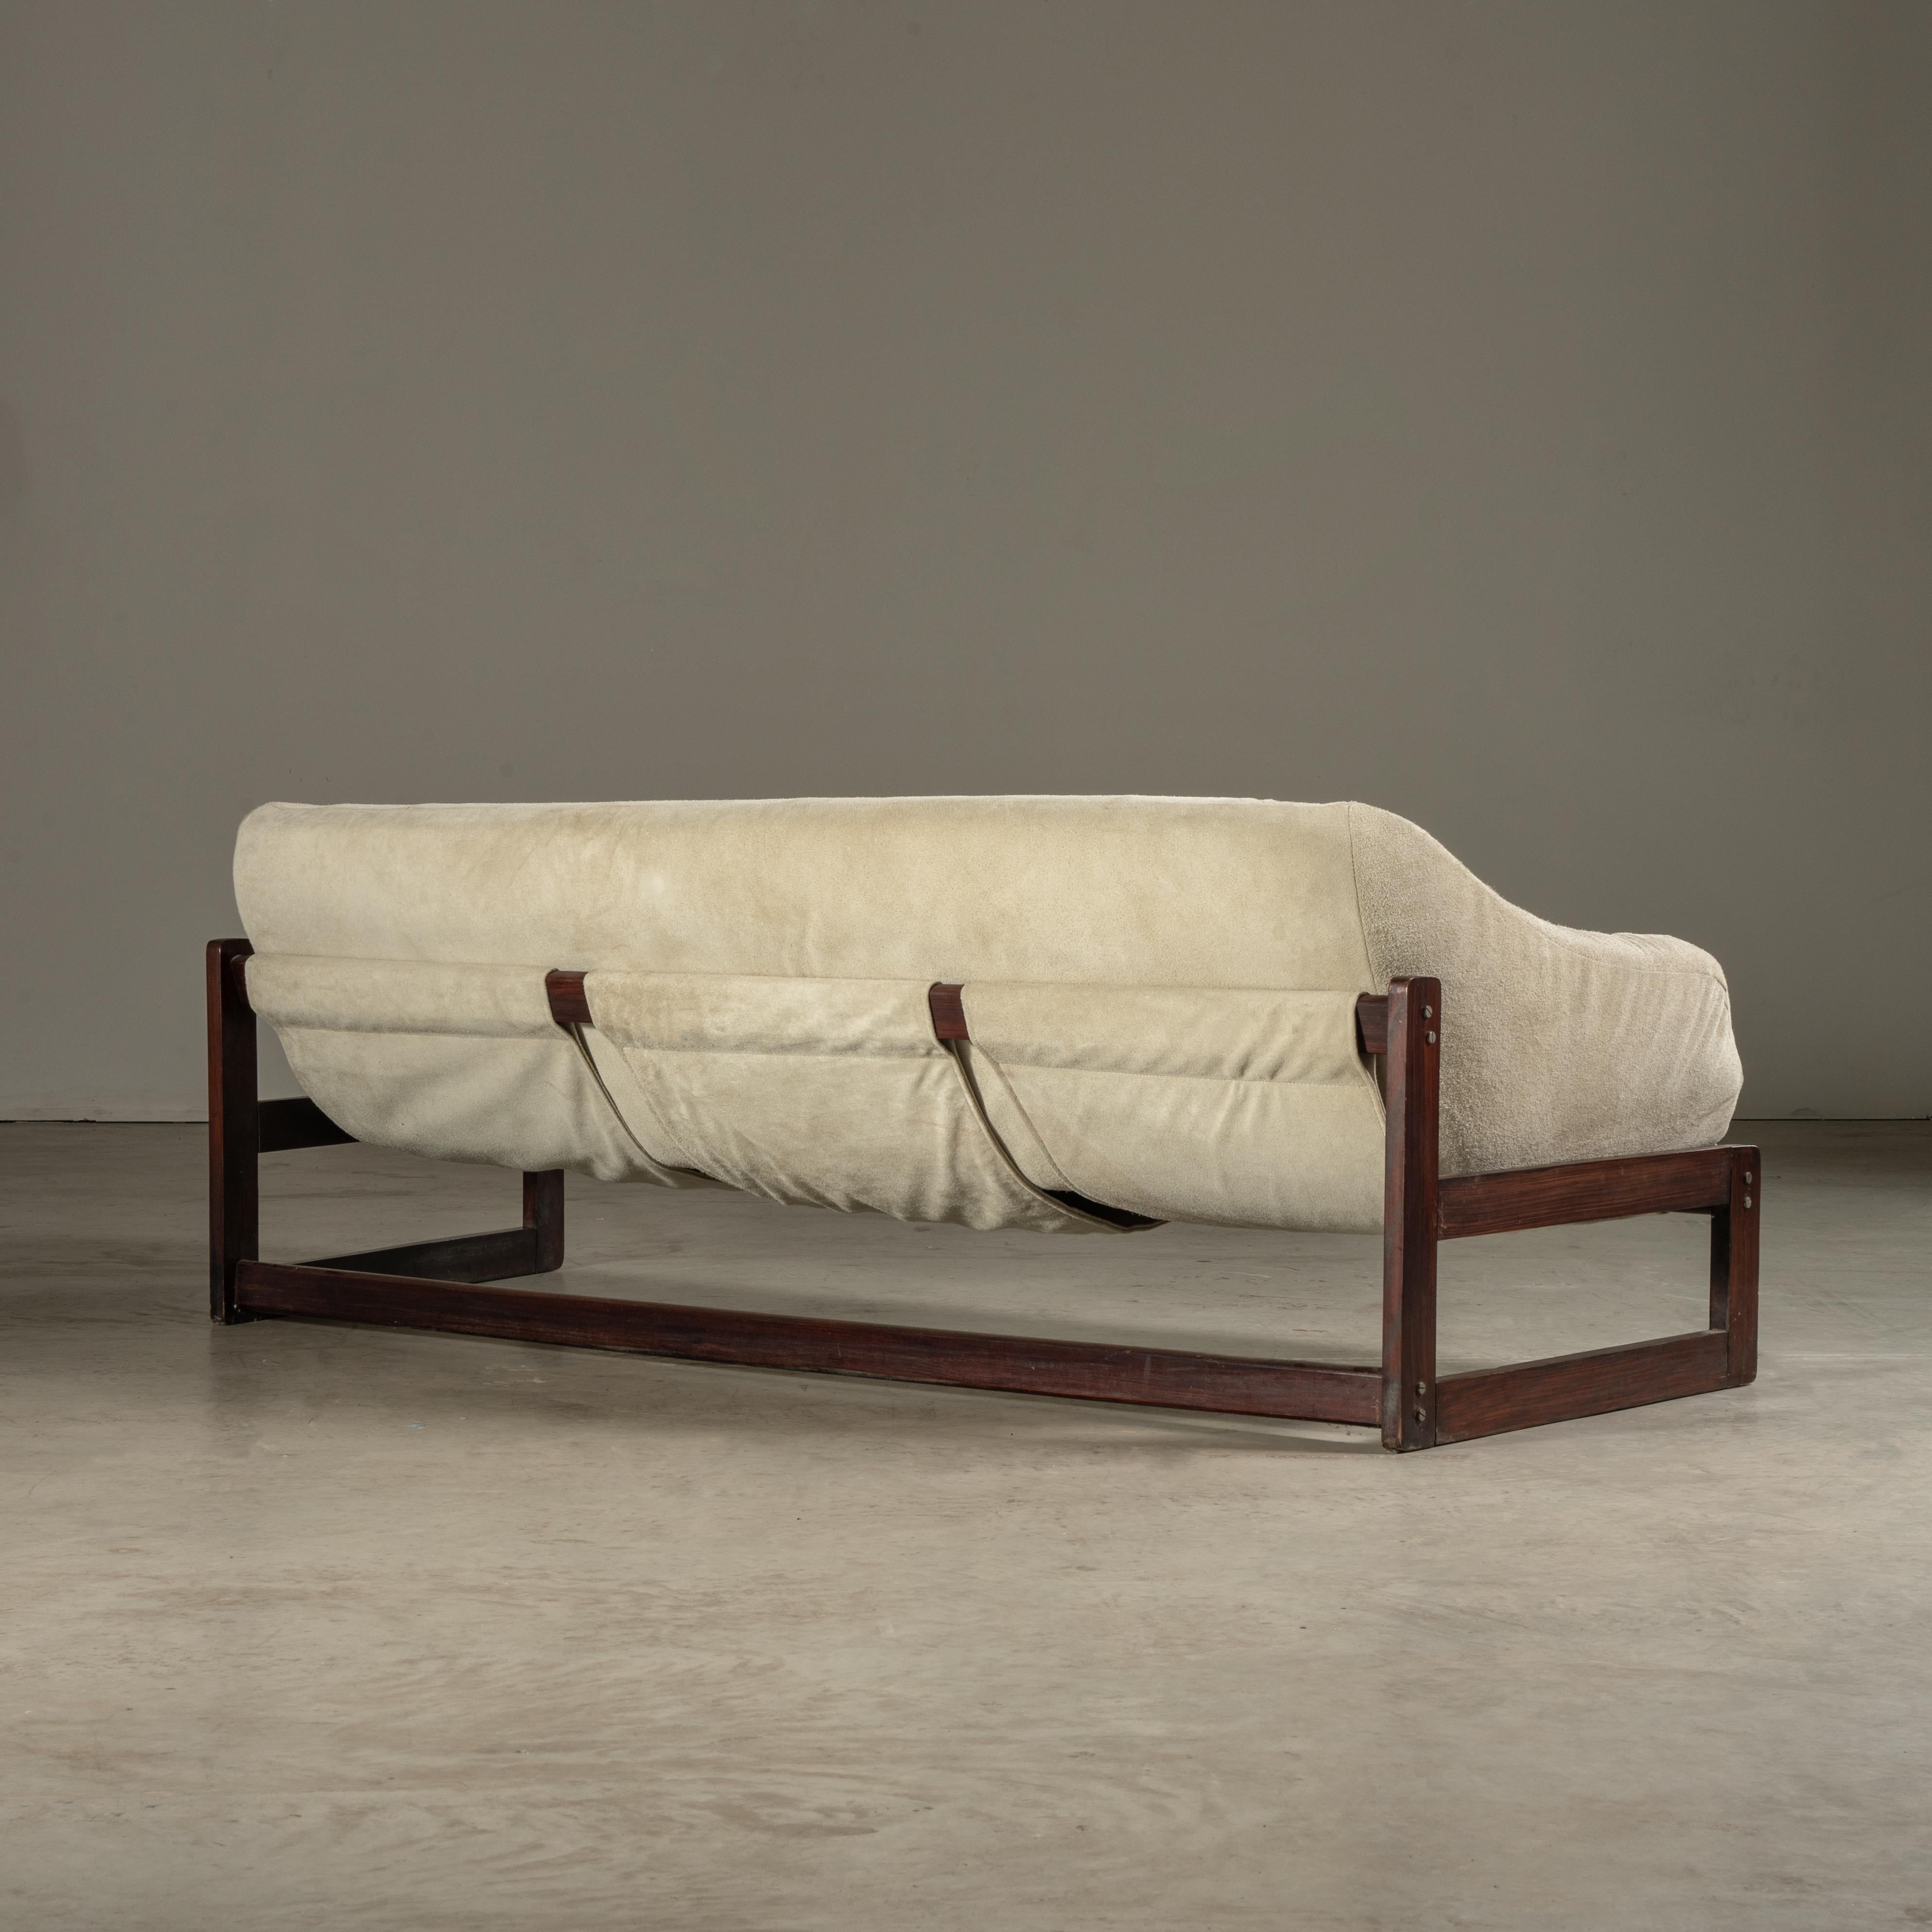 Fabric Architectural Sofa in Hardwood, by Percival Lafer, Brazilian Mid-Century Modern For Sale